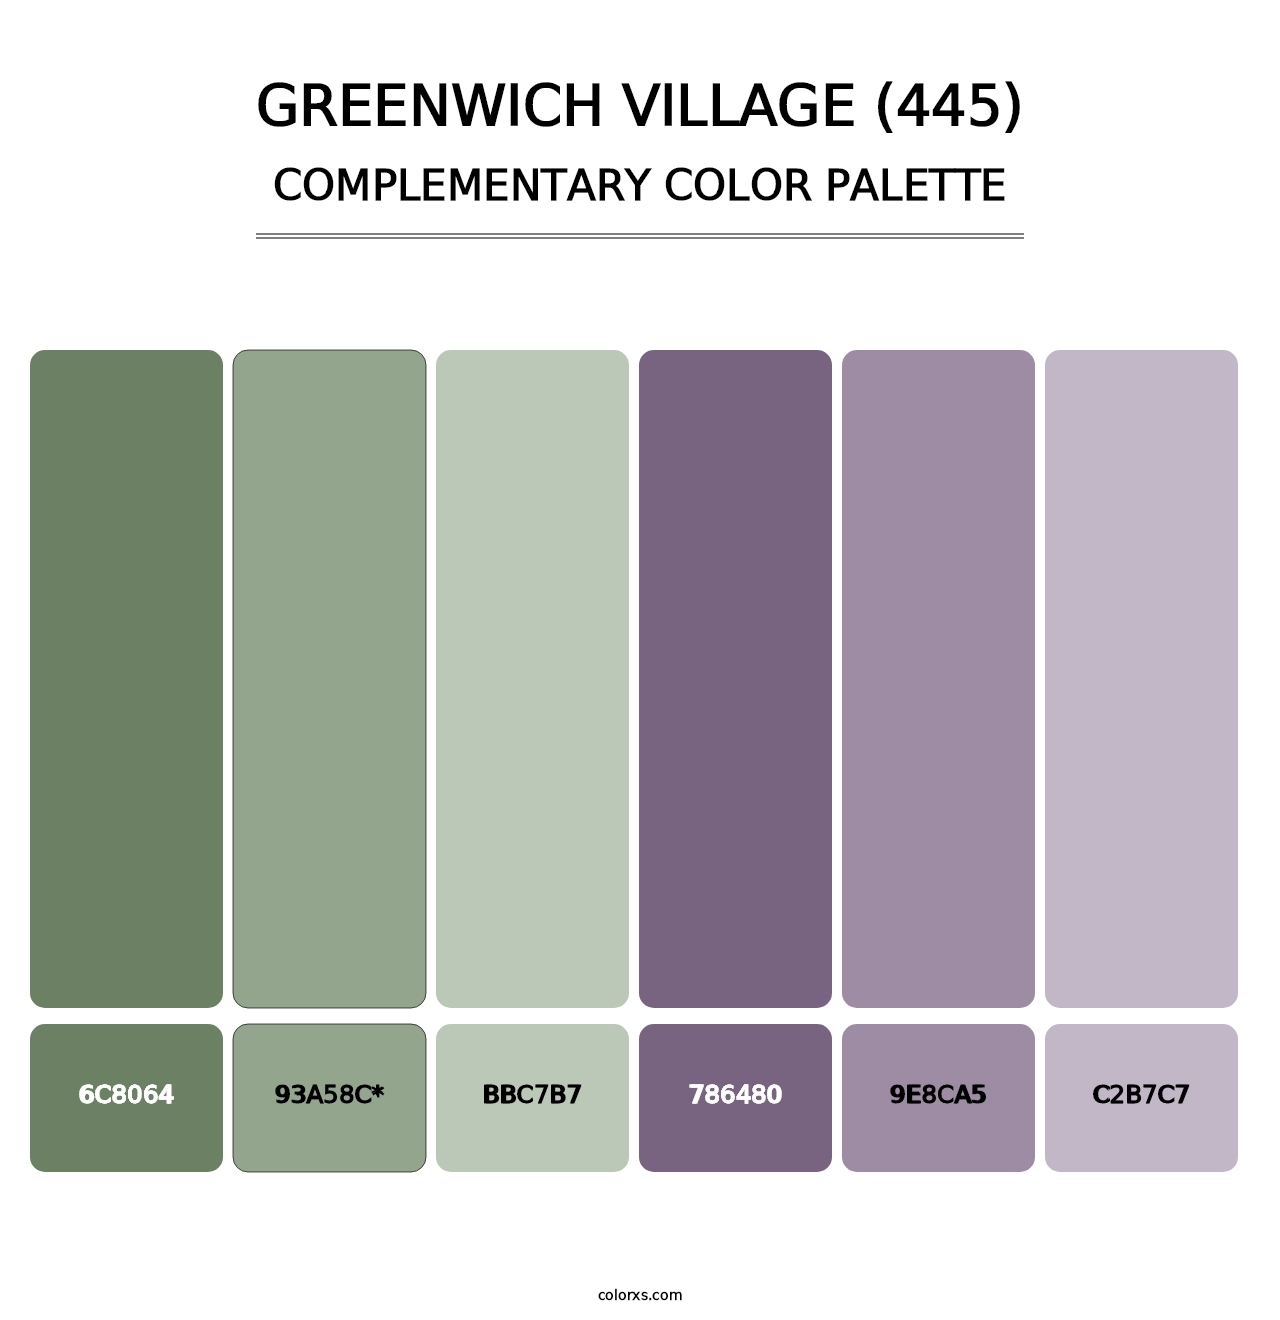 Greenwich Village (445) - Complementary Color Palette